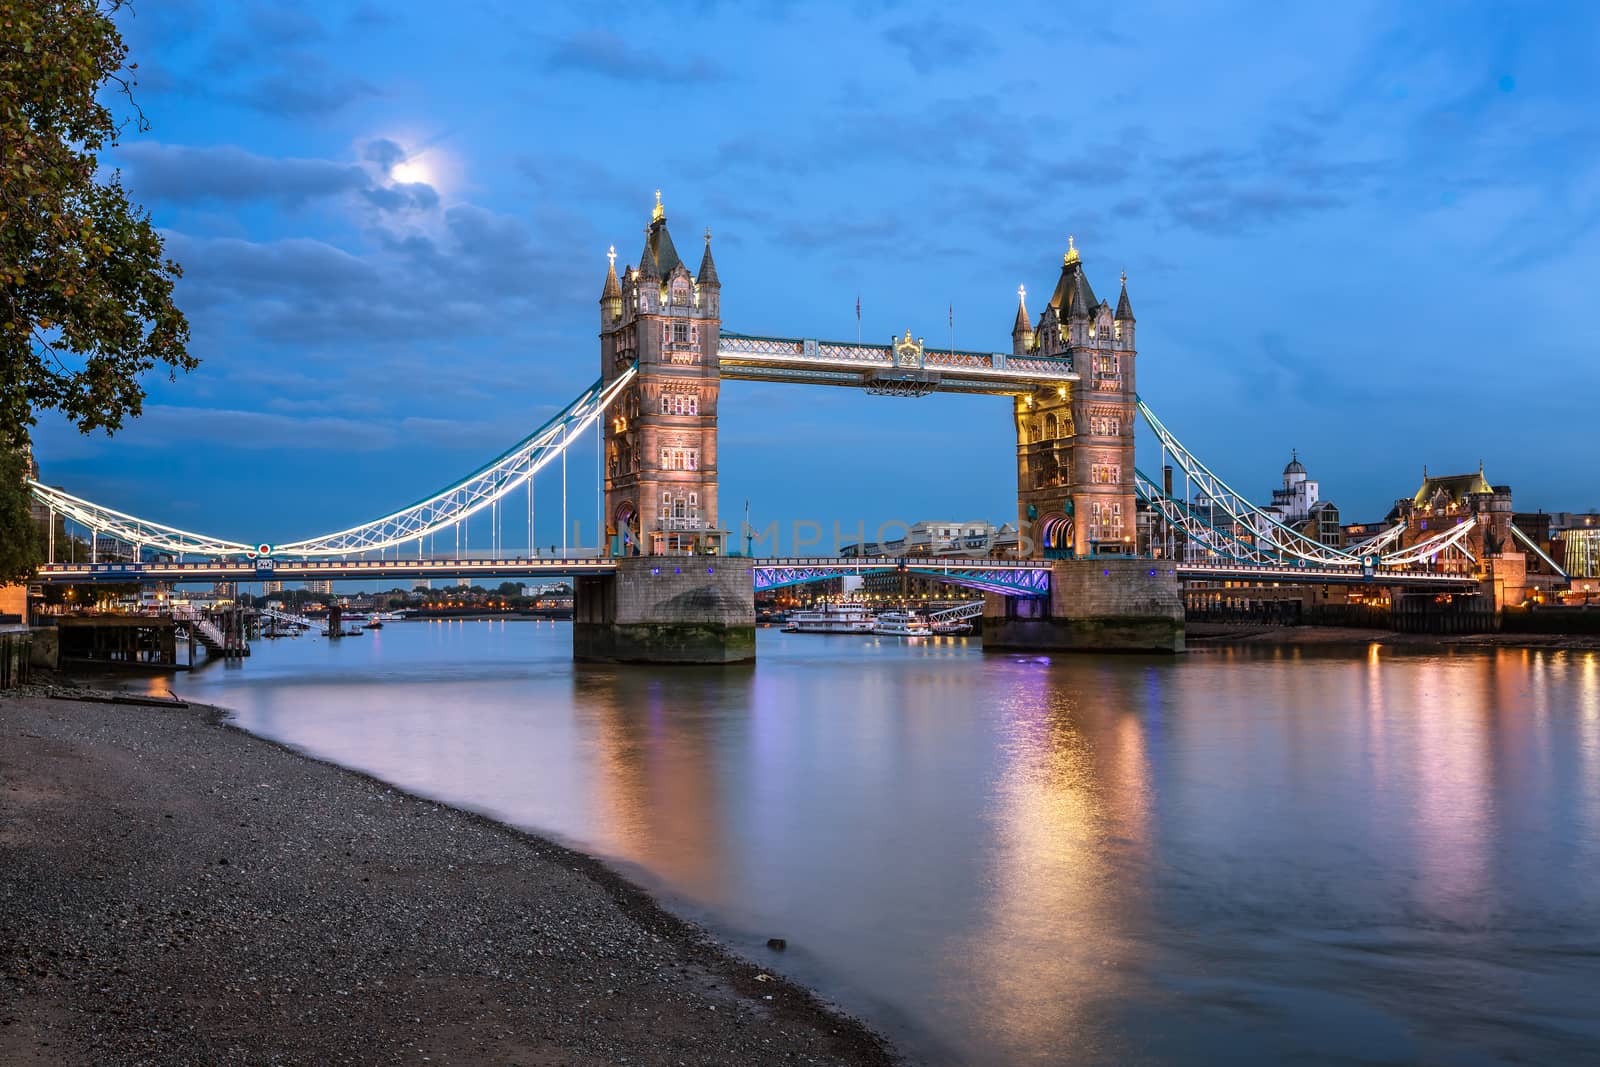 Tower Bridge and Thames River Lit by Moonlight at the Evening, L by anshar